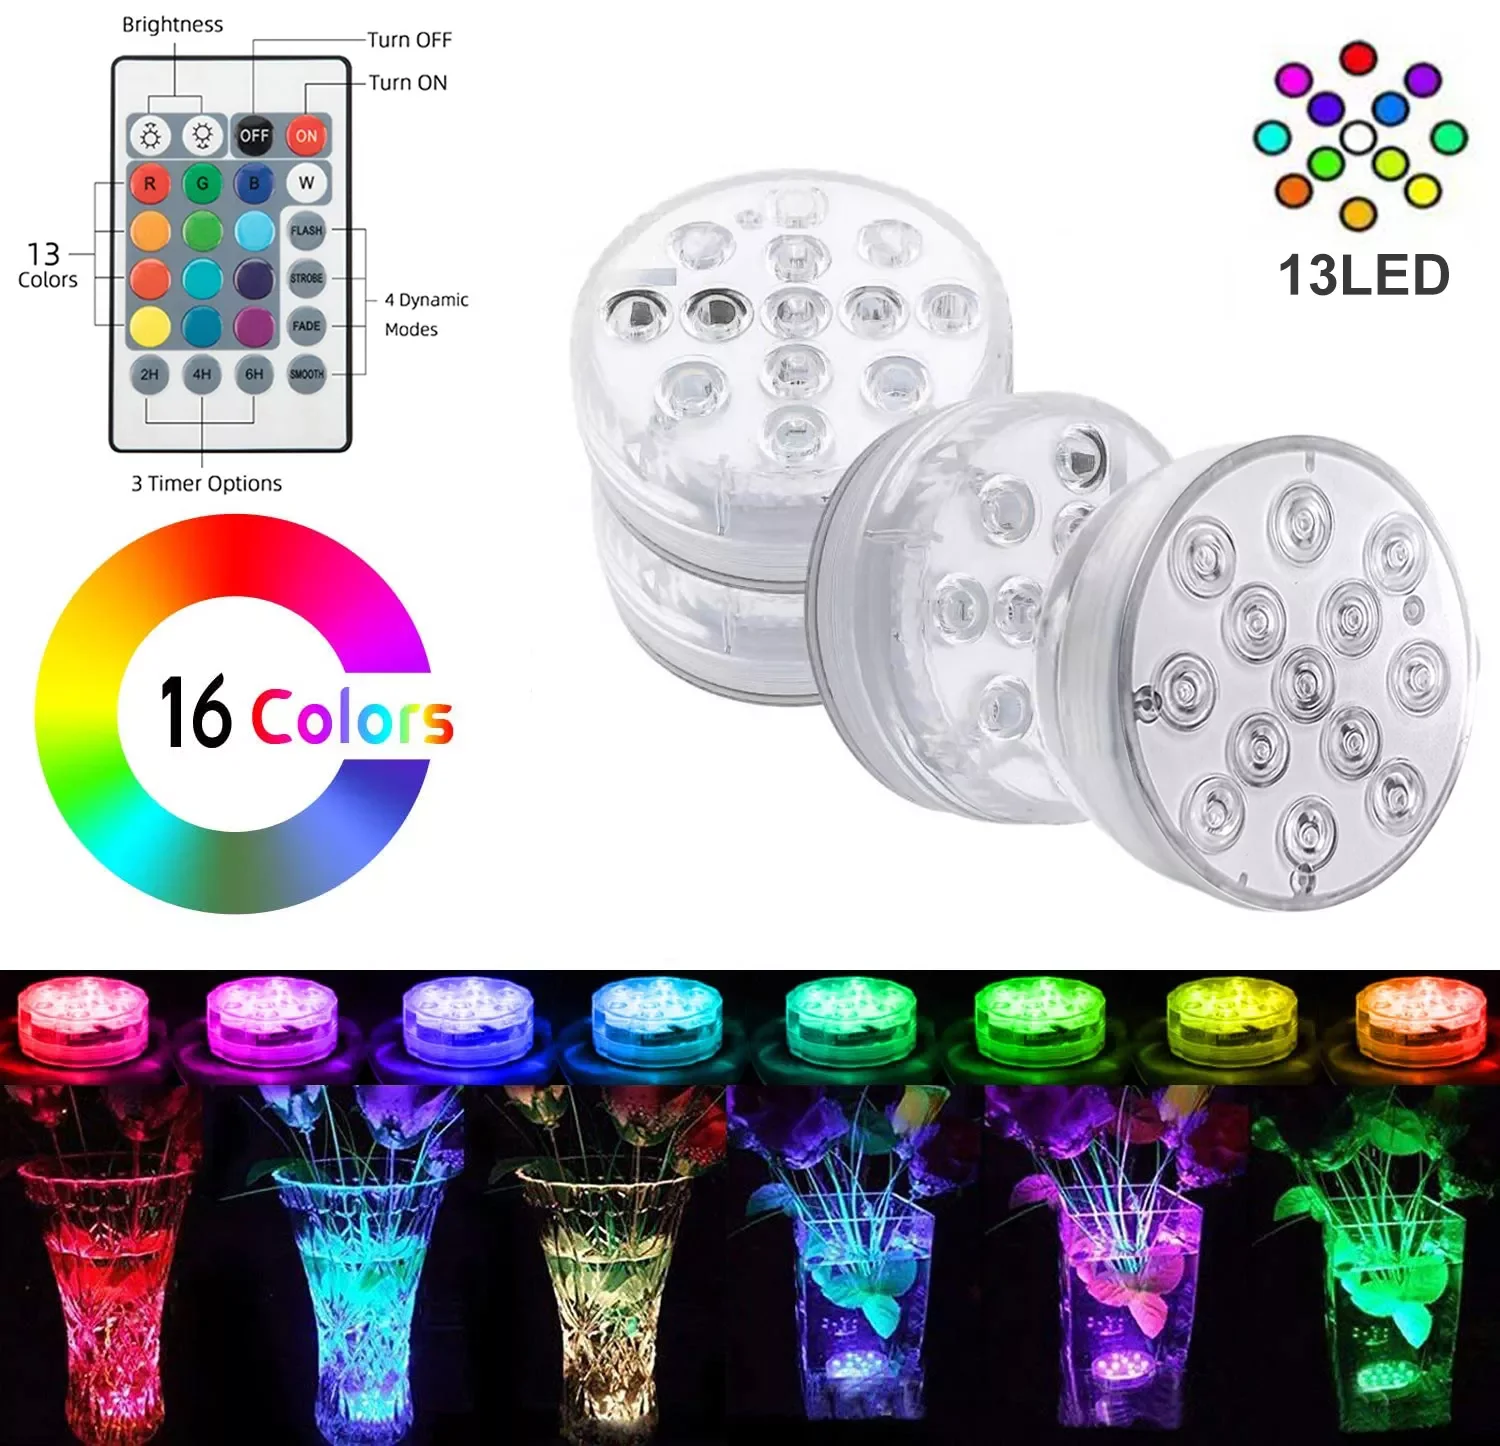 Upgrade 13 Led Remote Controlled RGB Submersible Led Light Battery Operated Underwater Night Lamp Outdoor Vase Bowl Garden